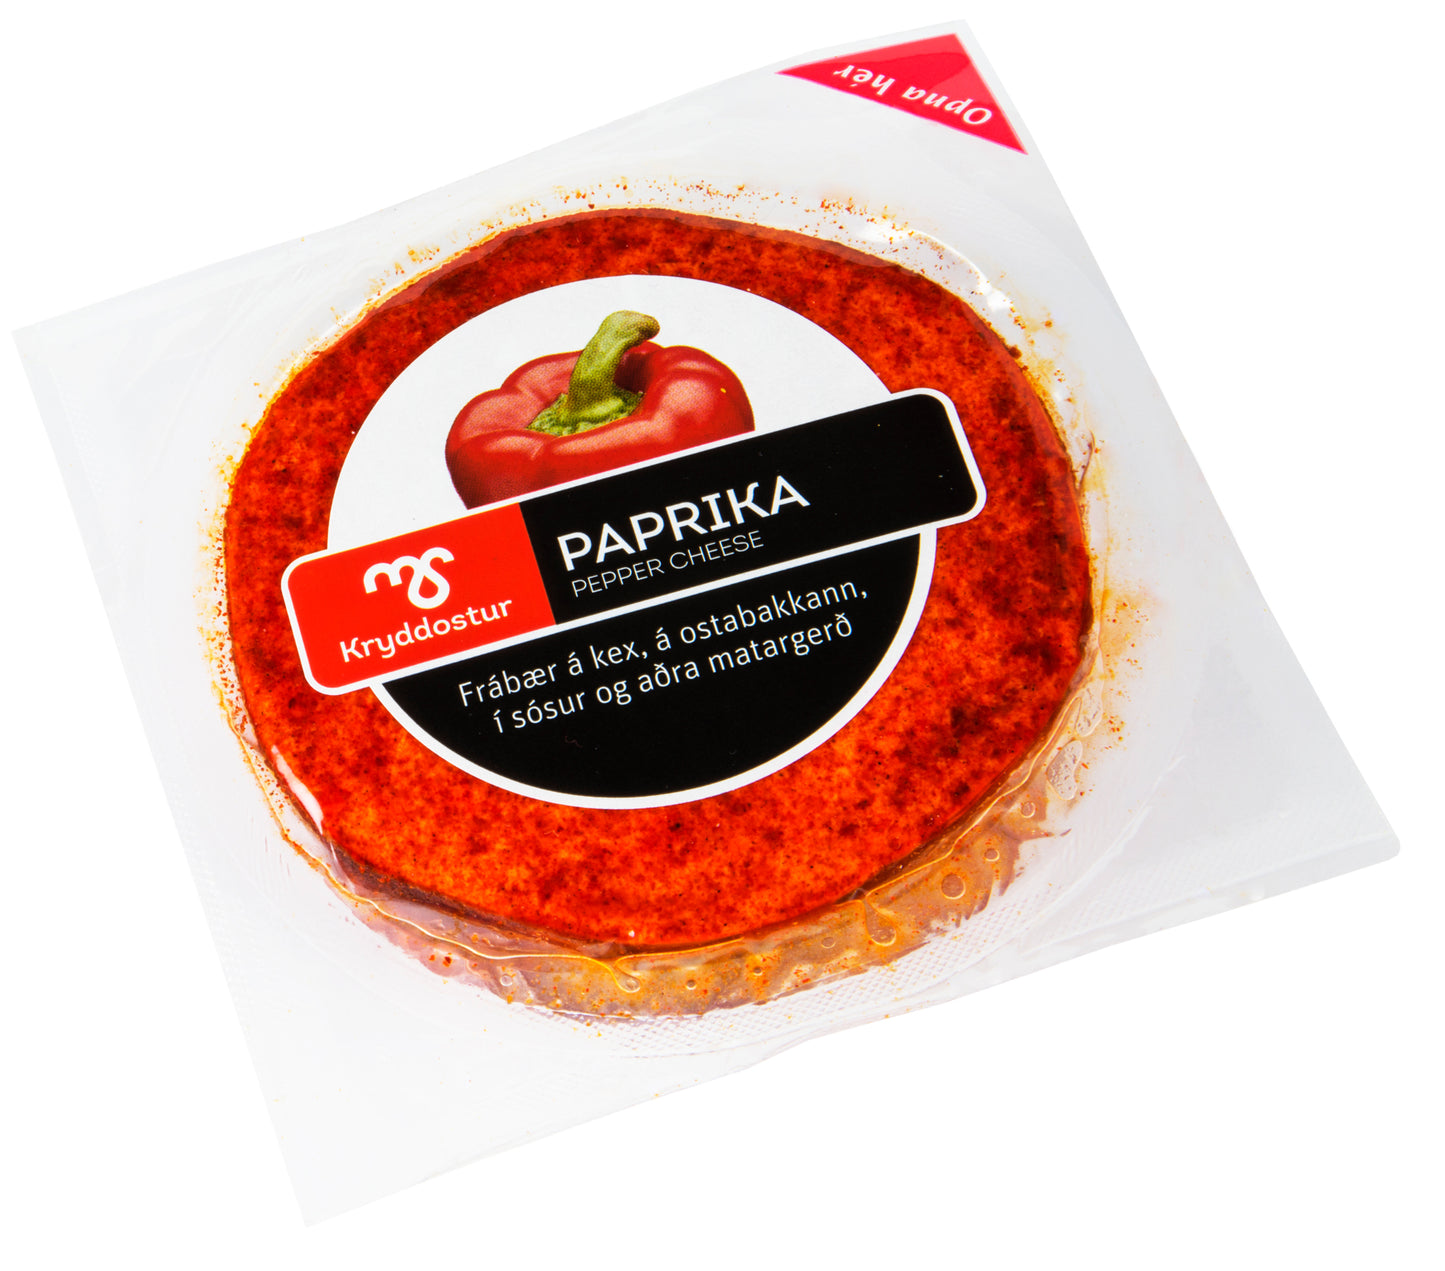 MS Paprikuostur / Red Pepper Cheese 150g